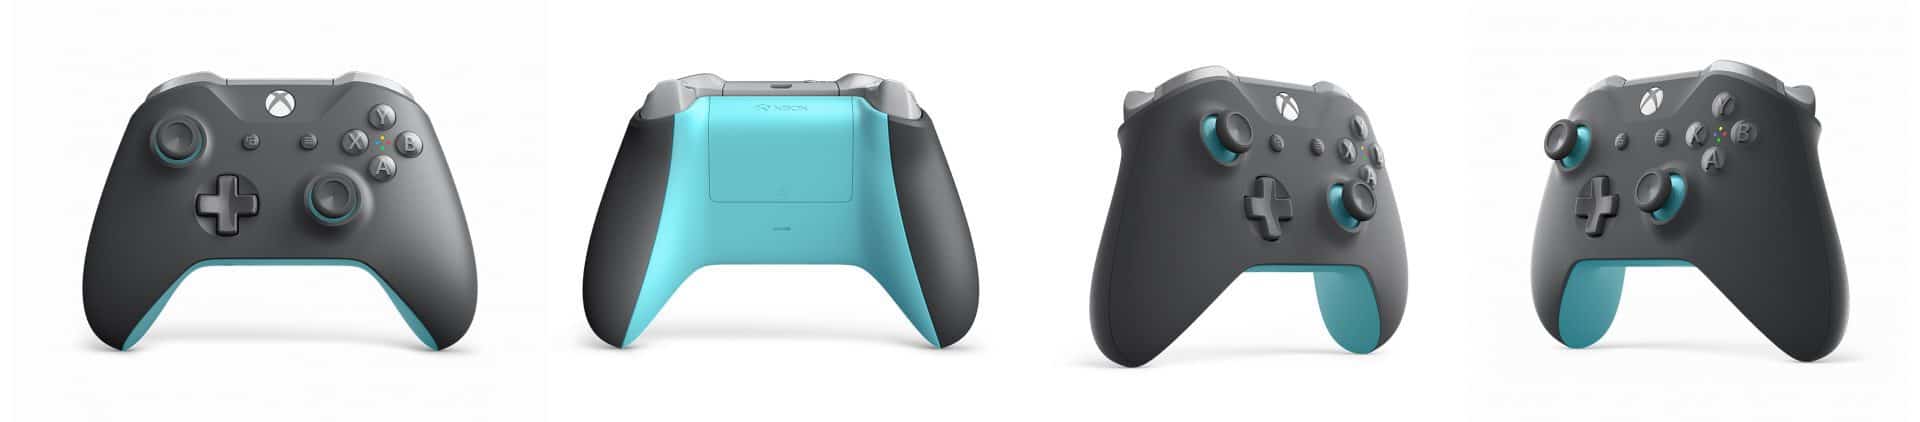 xbox one controller gray and blue